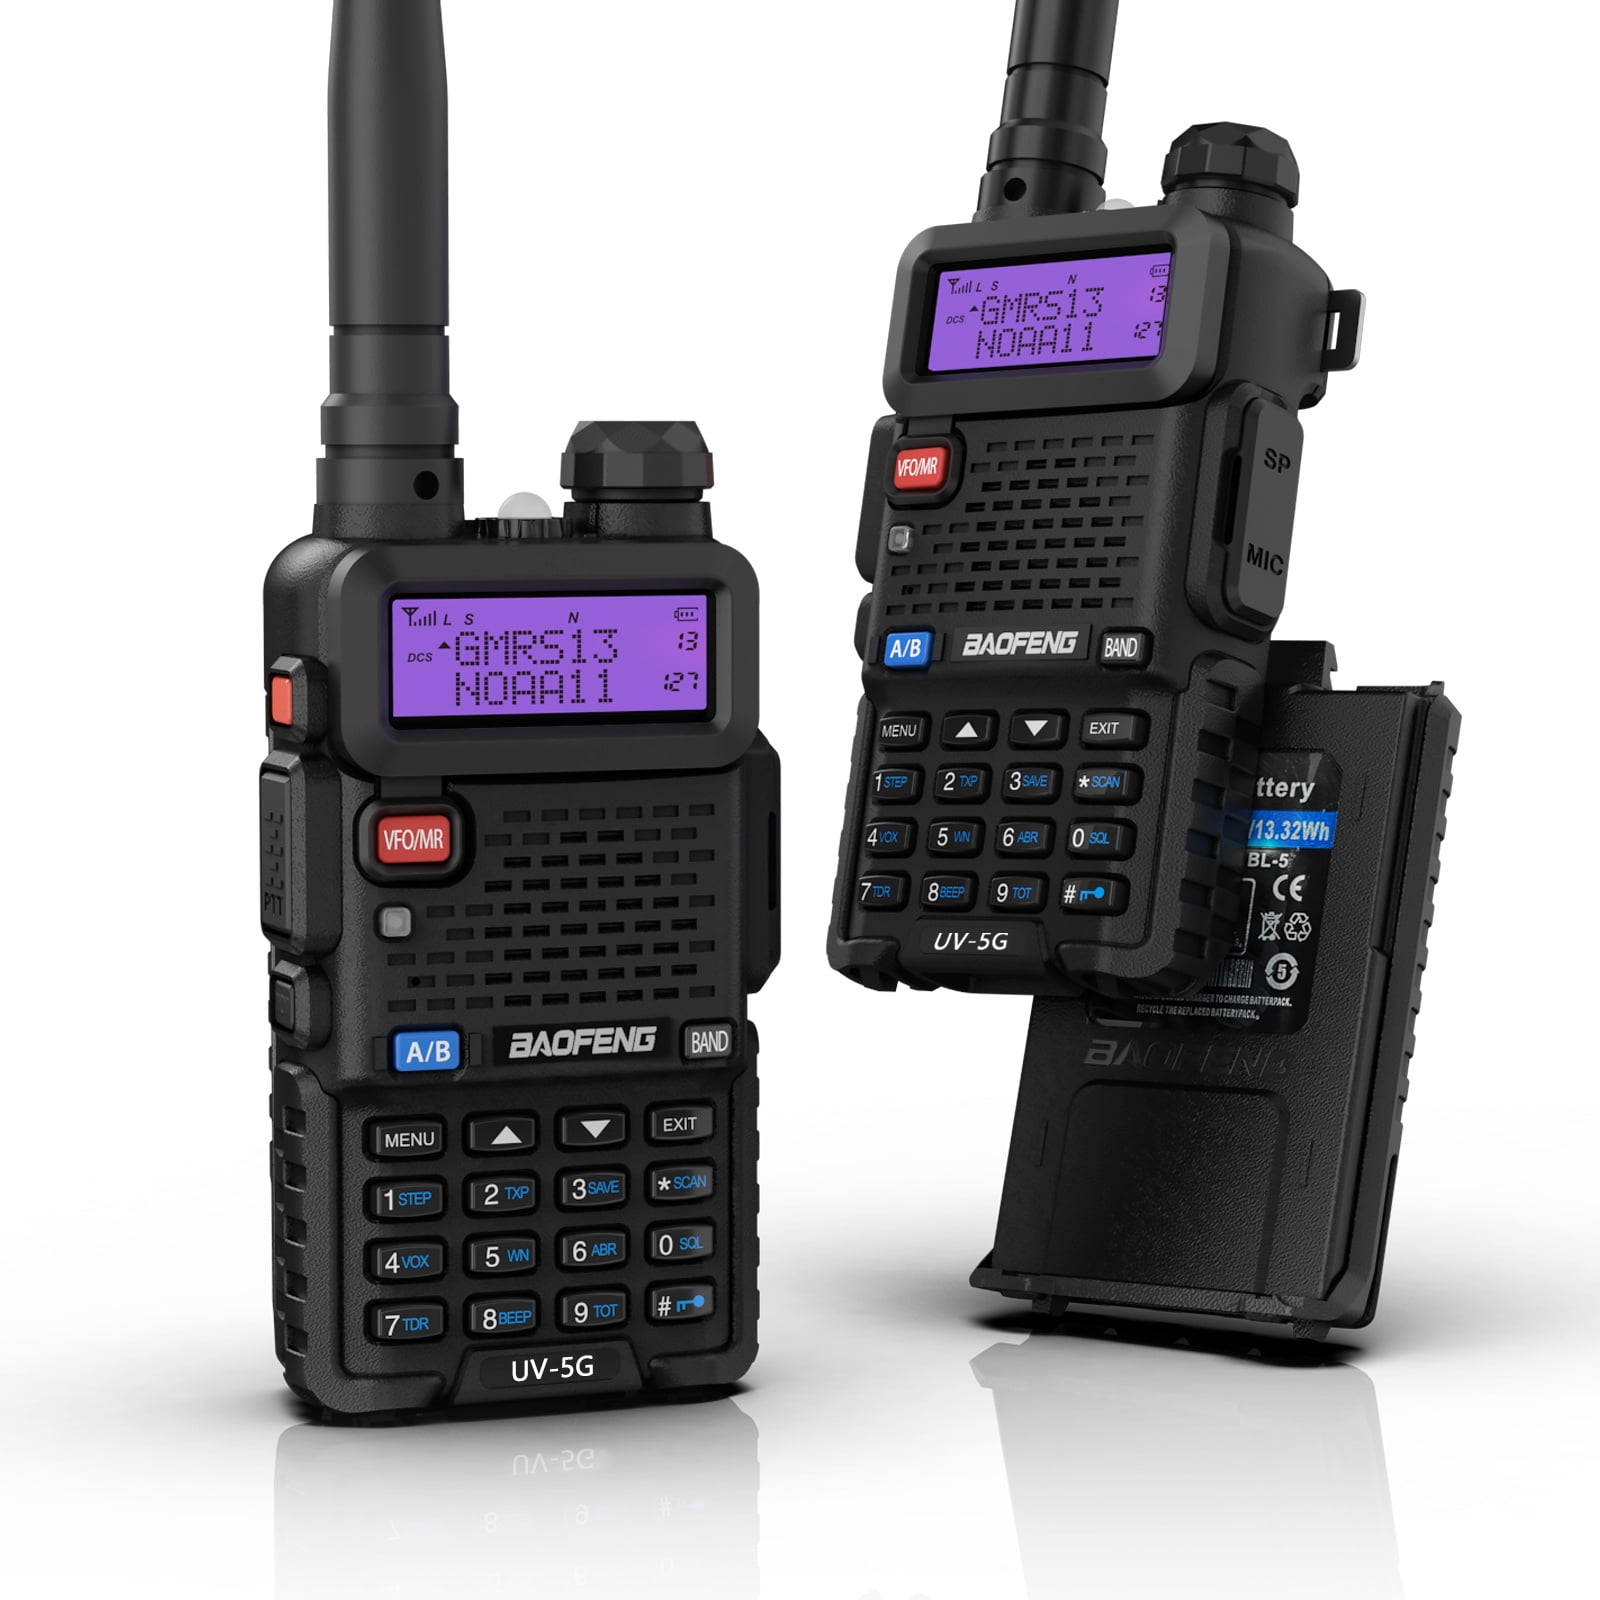 Ham Radio Handheld (UV-5R 8W) Dual Band 2-Way Radio with Rechargeable 1800mAh Battery Handheld Walkie Talkies Complete Set with Earpiece and Program - 1